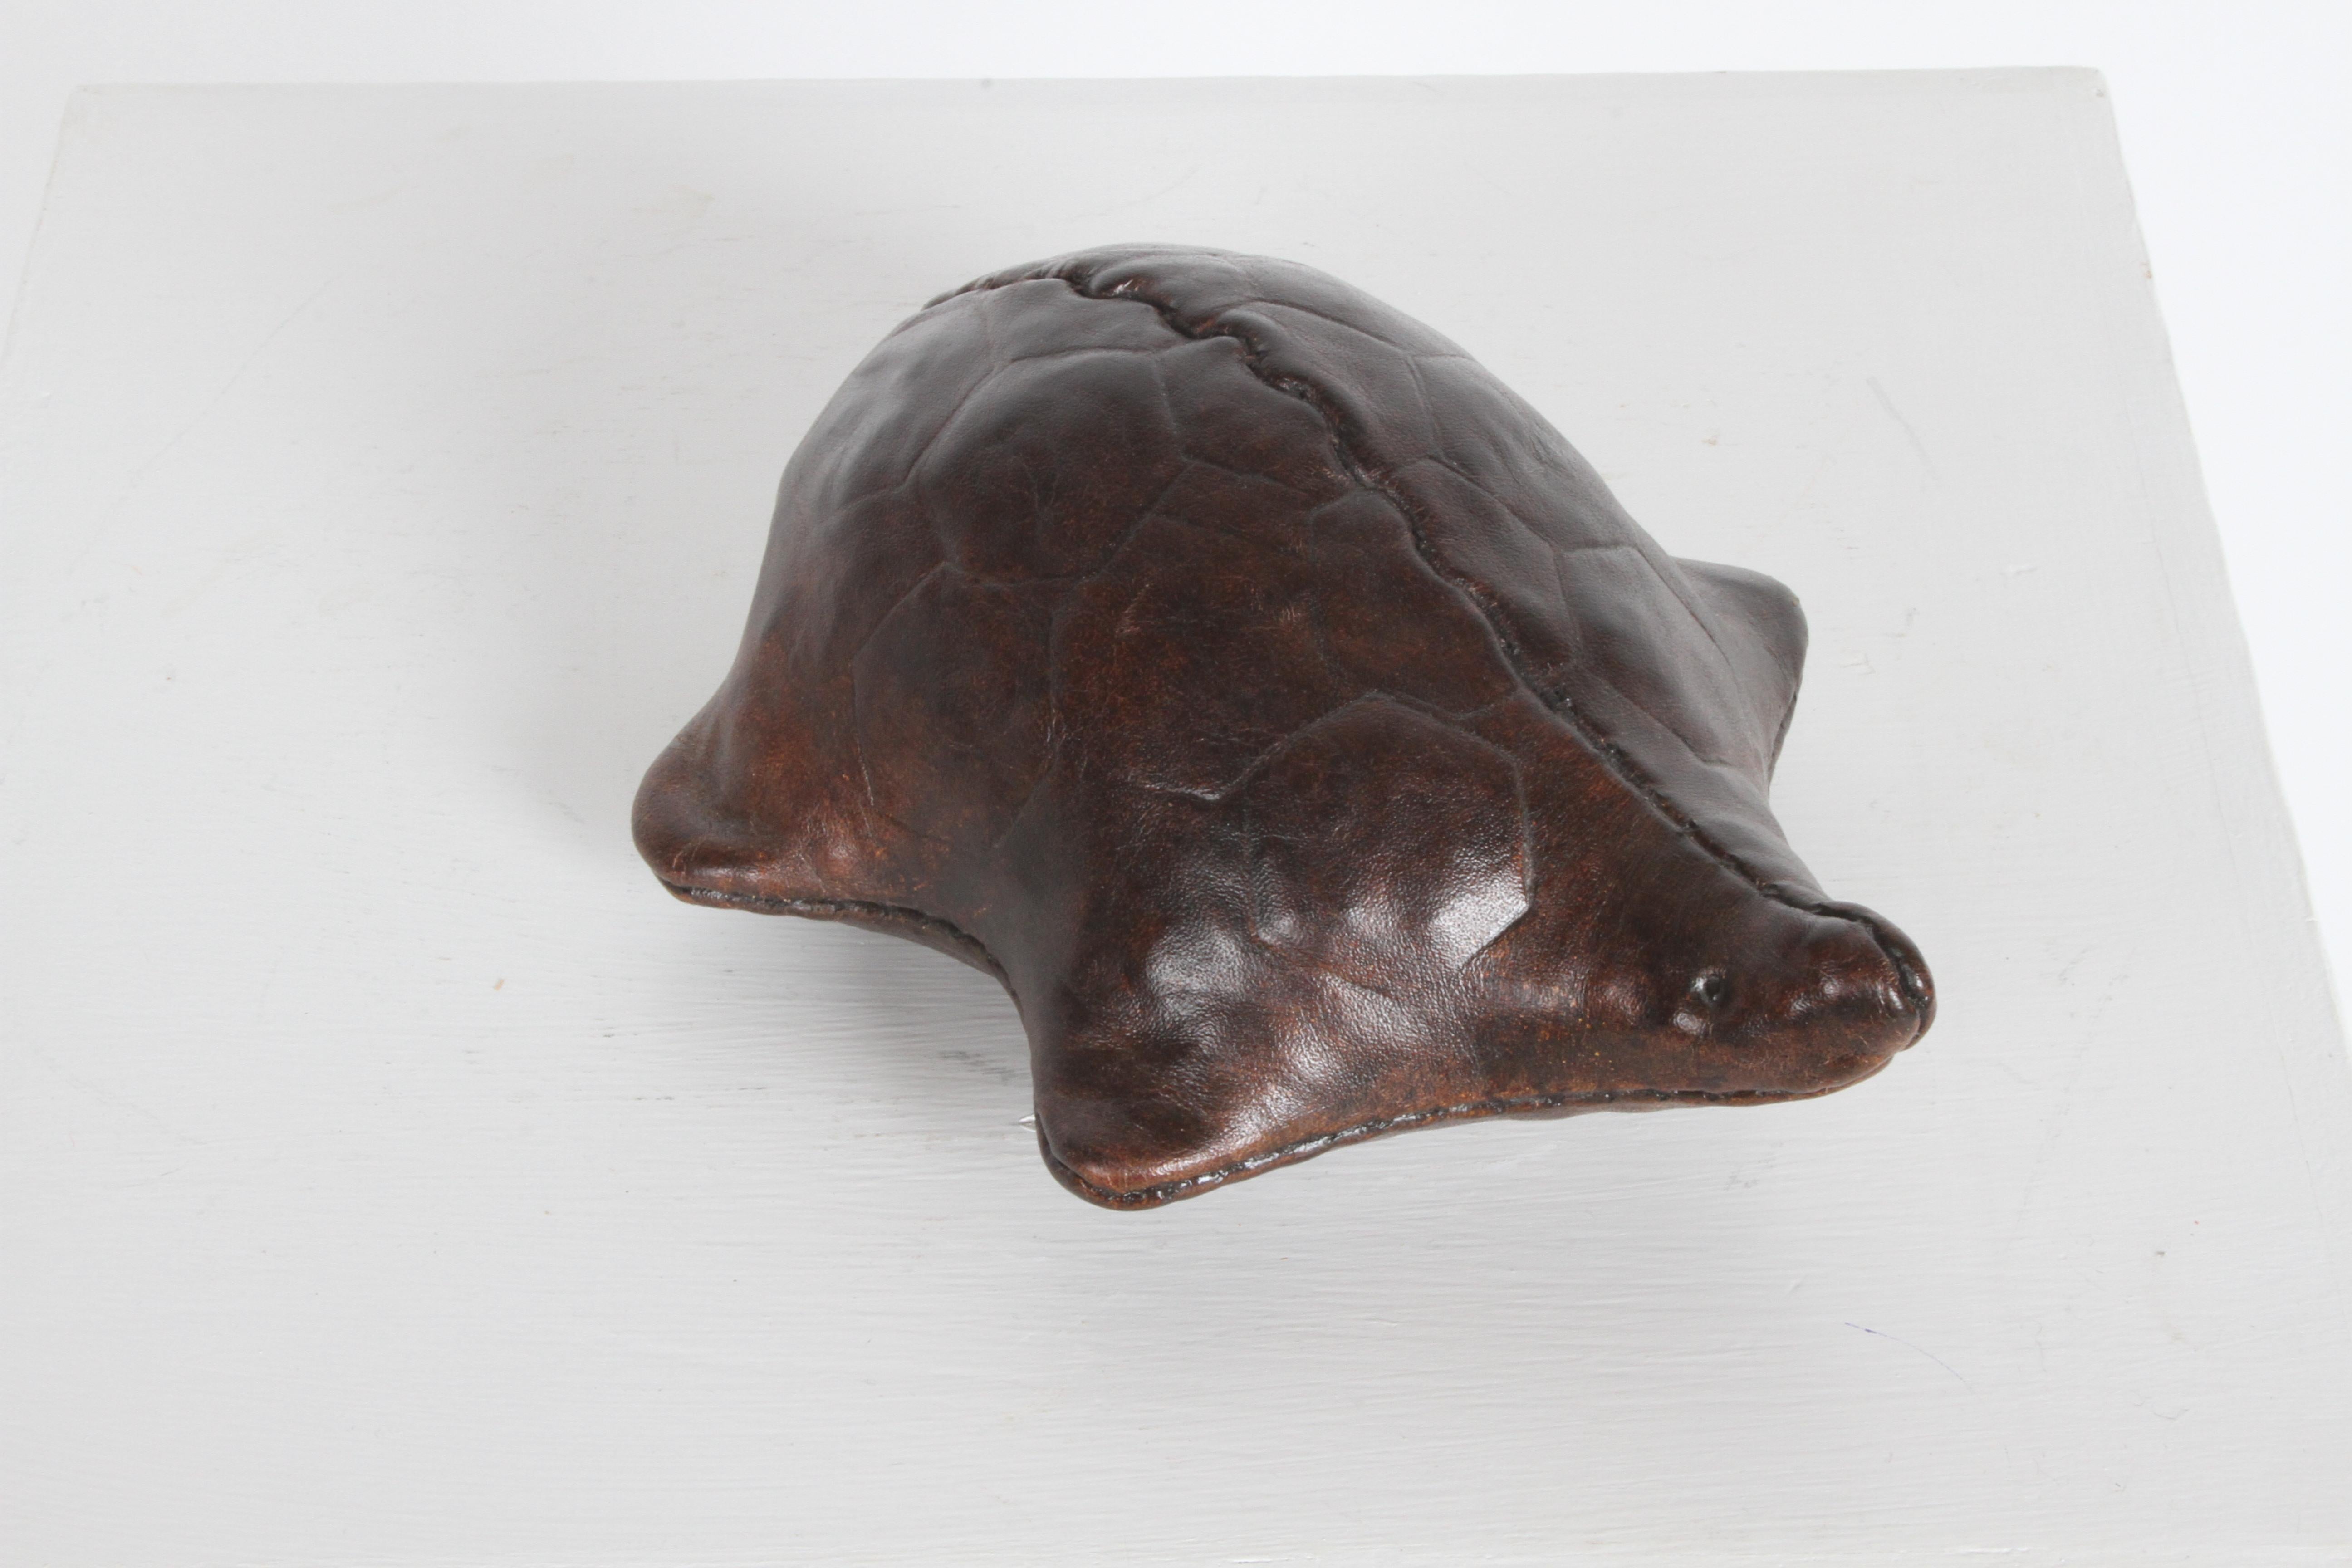 Vintage Dimitri Omersa embossed brown leather Turtle with label. Can be used as a paperweight or as decoration. Fun size. In fine condition, retains label.